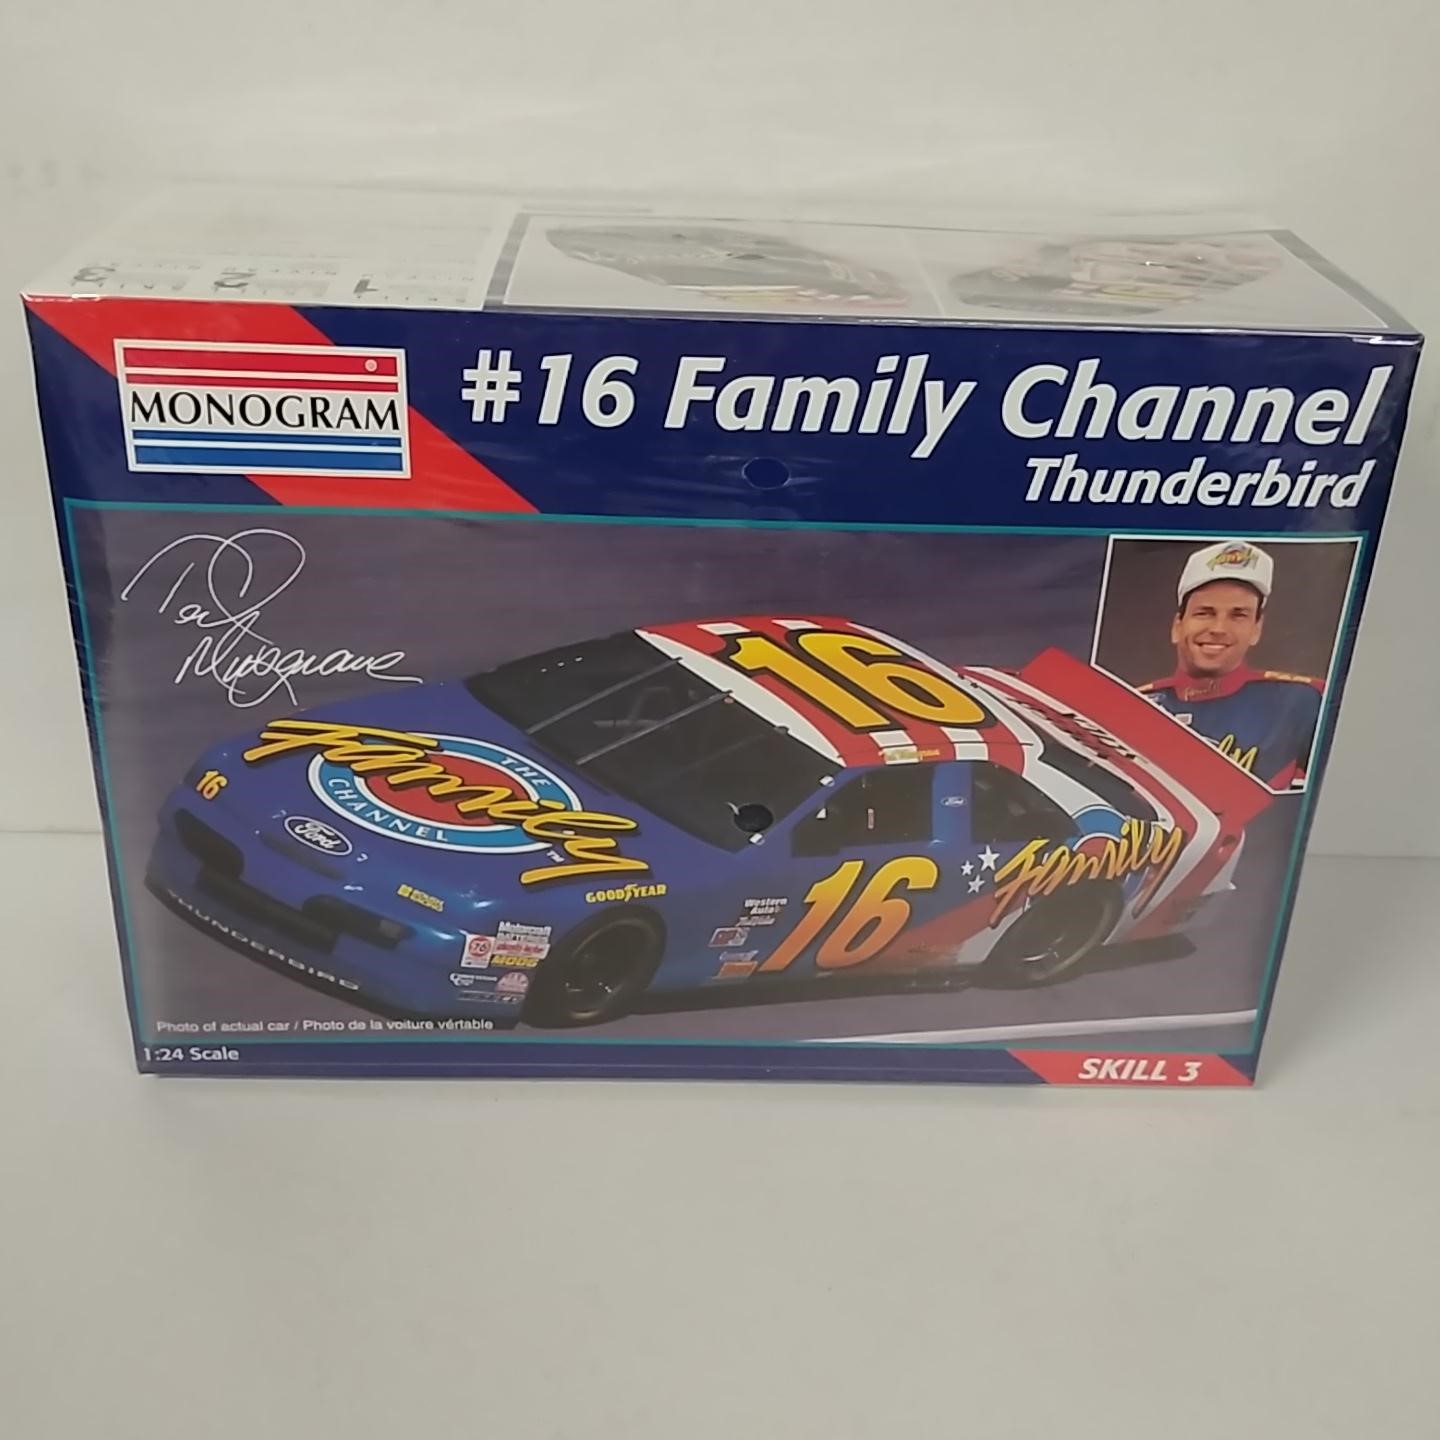 1995 Ted Musgrave 1/24th Family Channel Thunderbird model kit by Monogram